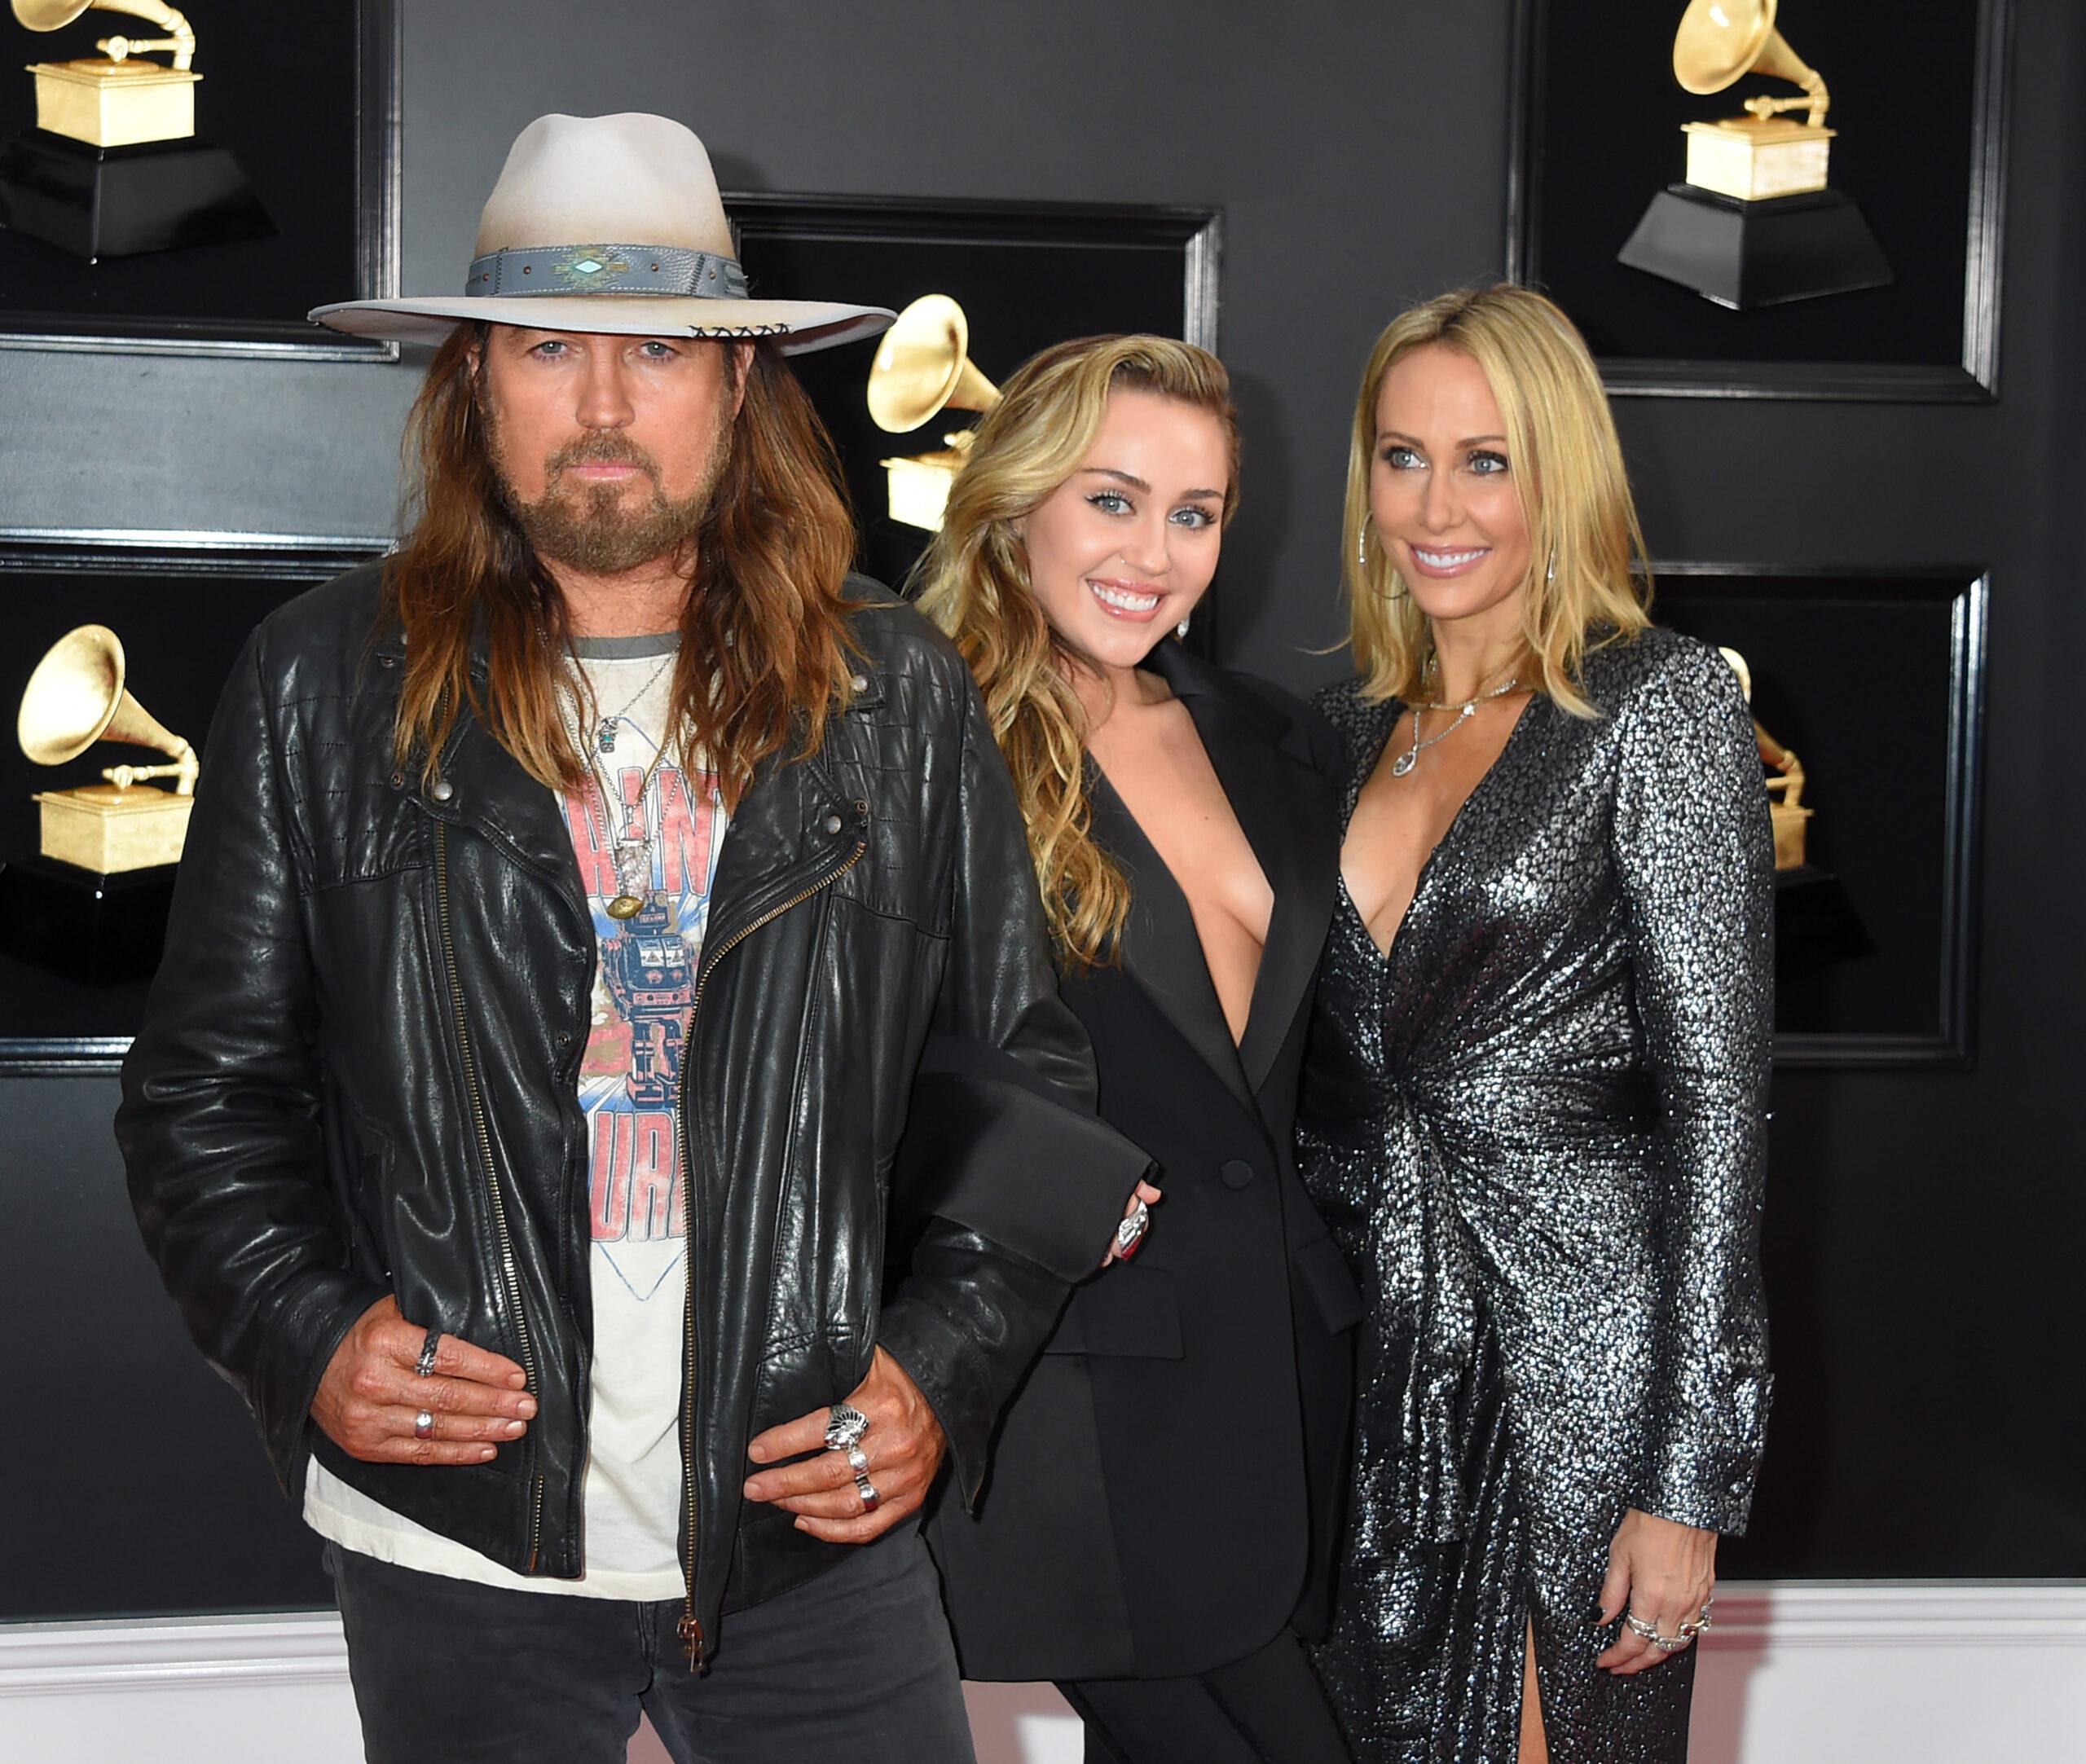 Tish Cyrus, her ex-husband Billy Ray Cyrus, and Miley Cyrus